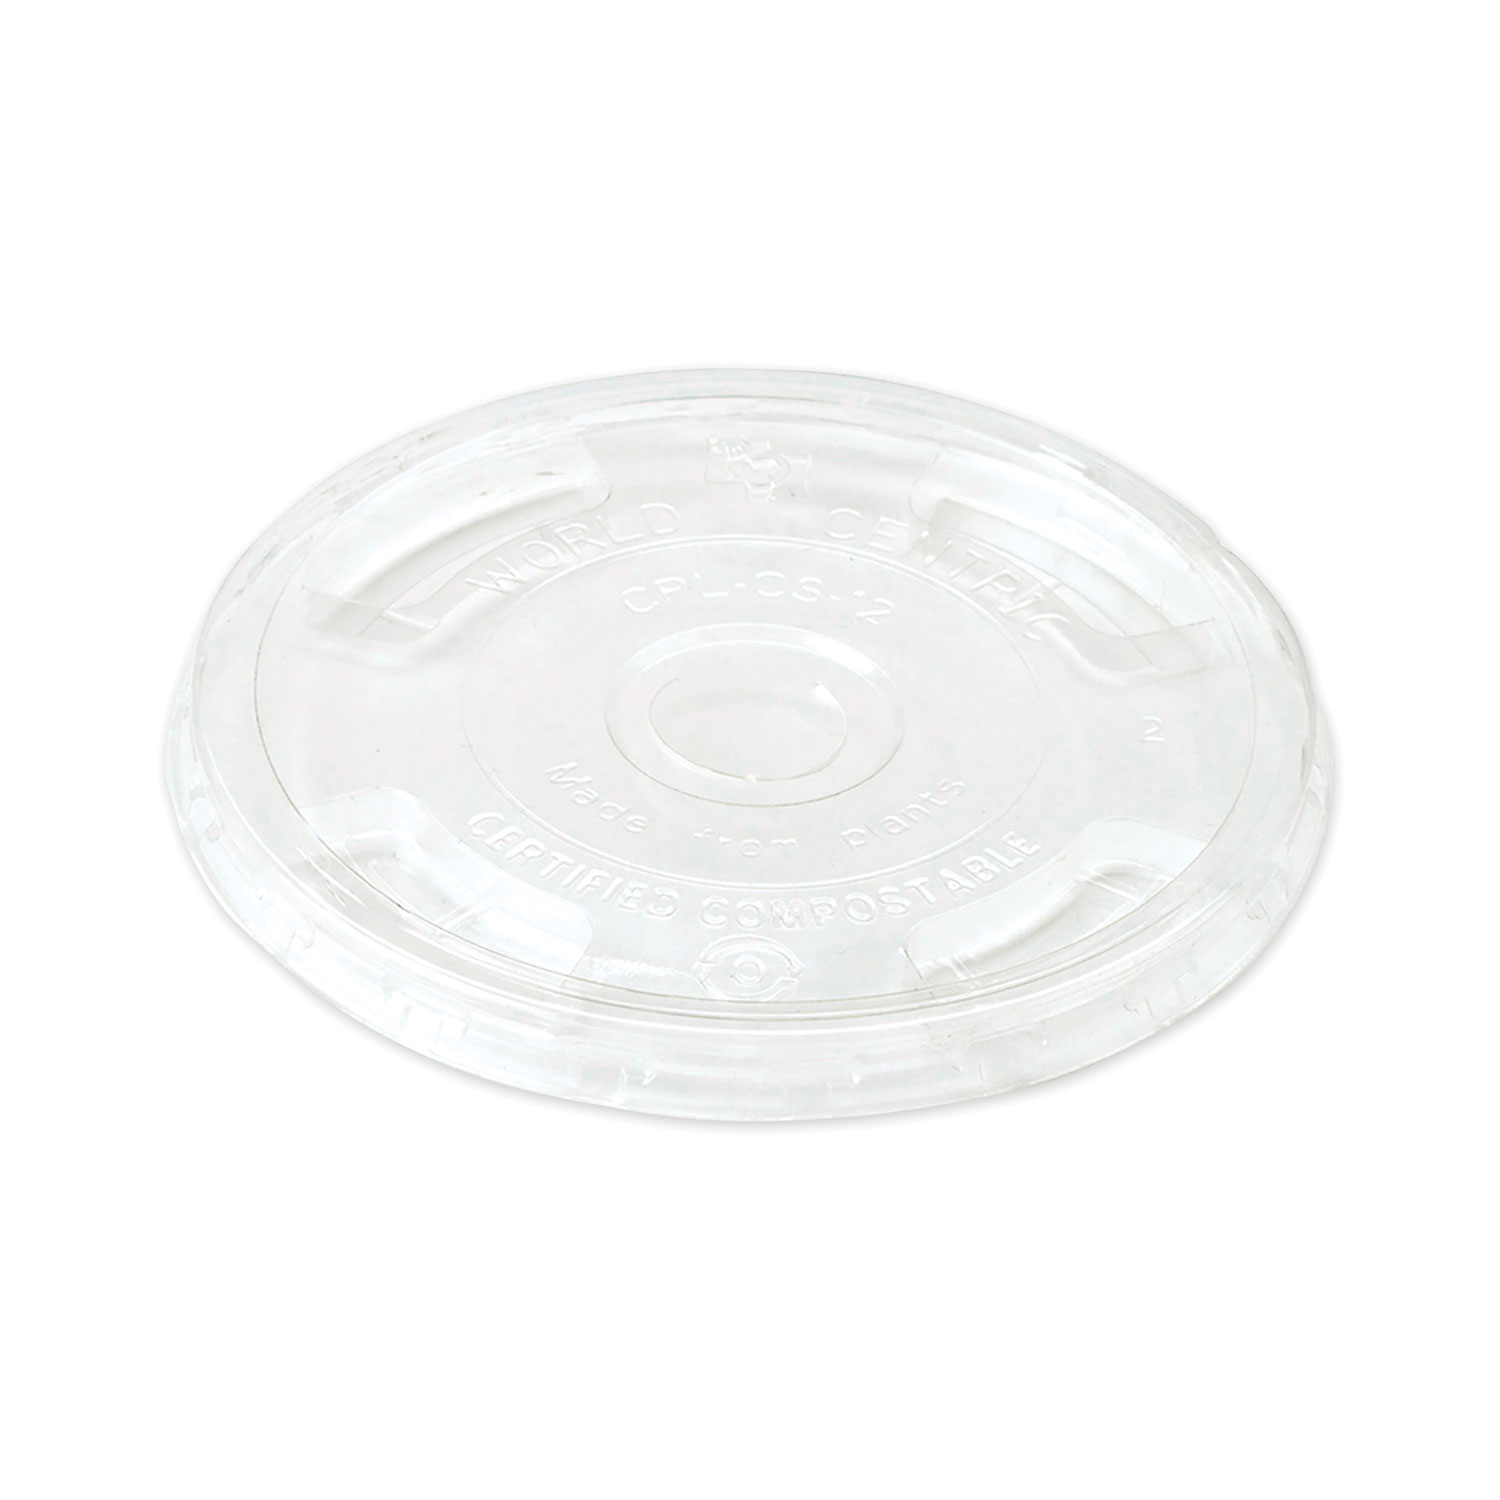  World Centric CPLCS12 Clear Cold Cup Lids, Fits 9-24 oz Cups, 1,000/Carton (WORCPLCS12) 